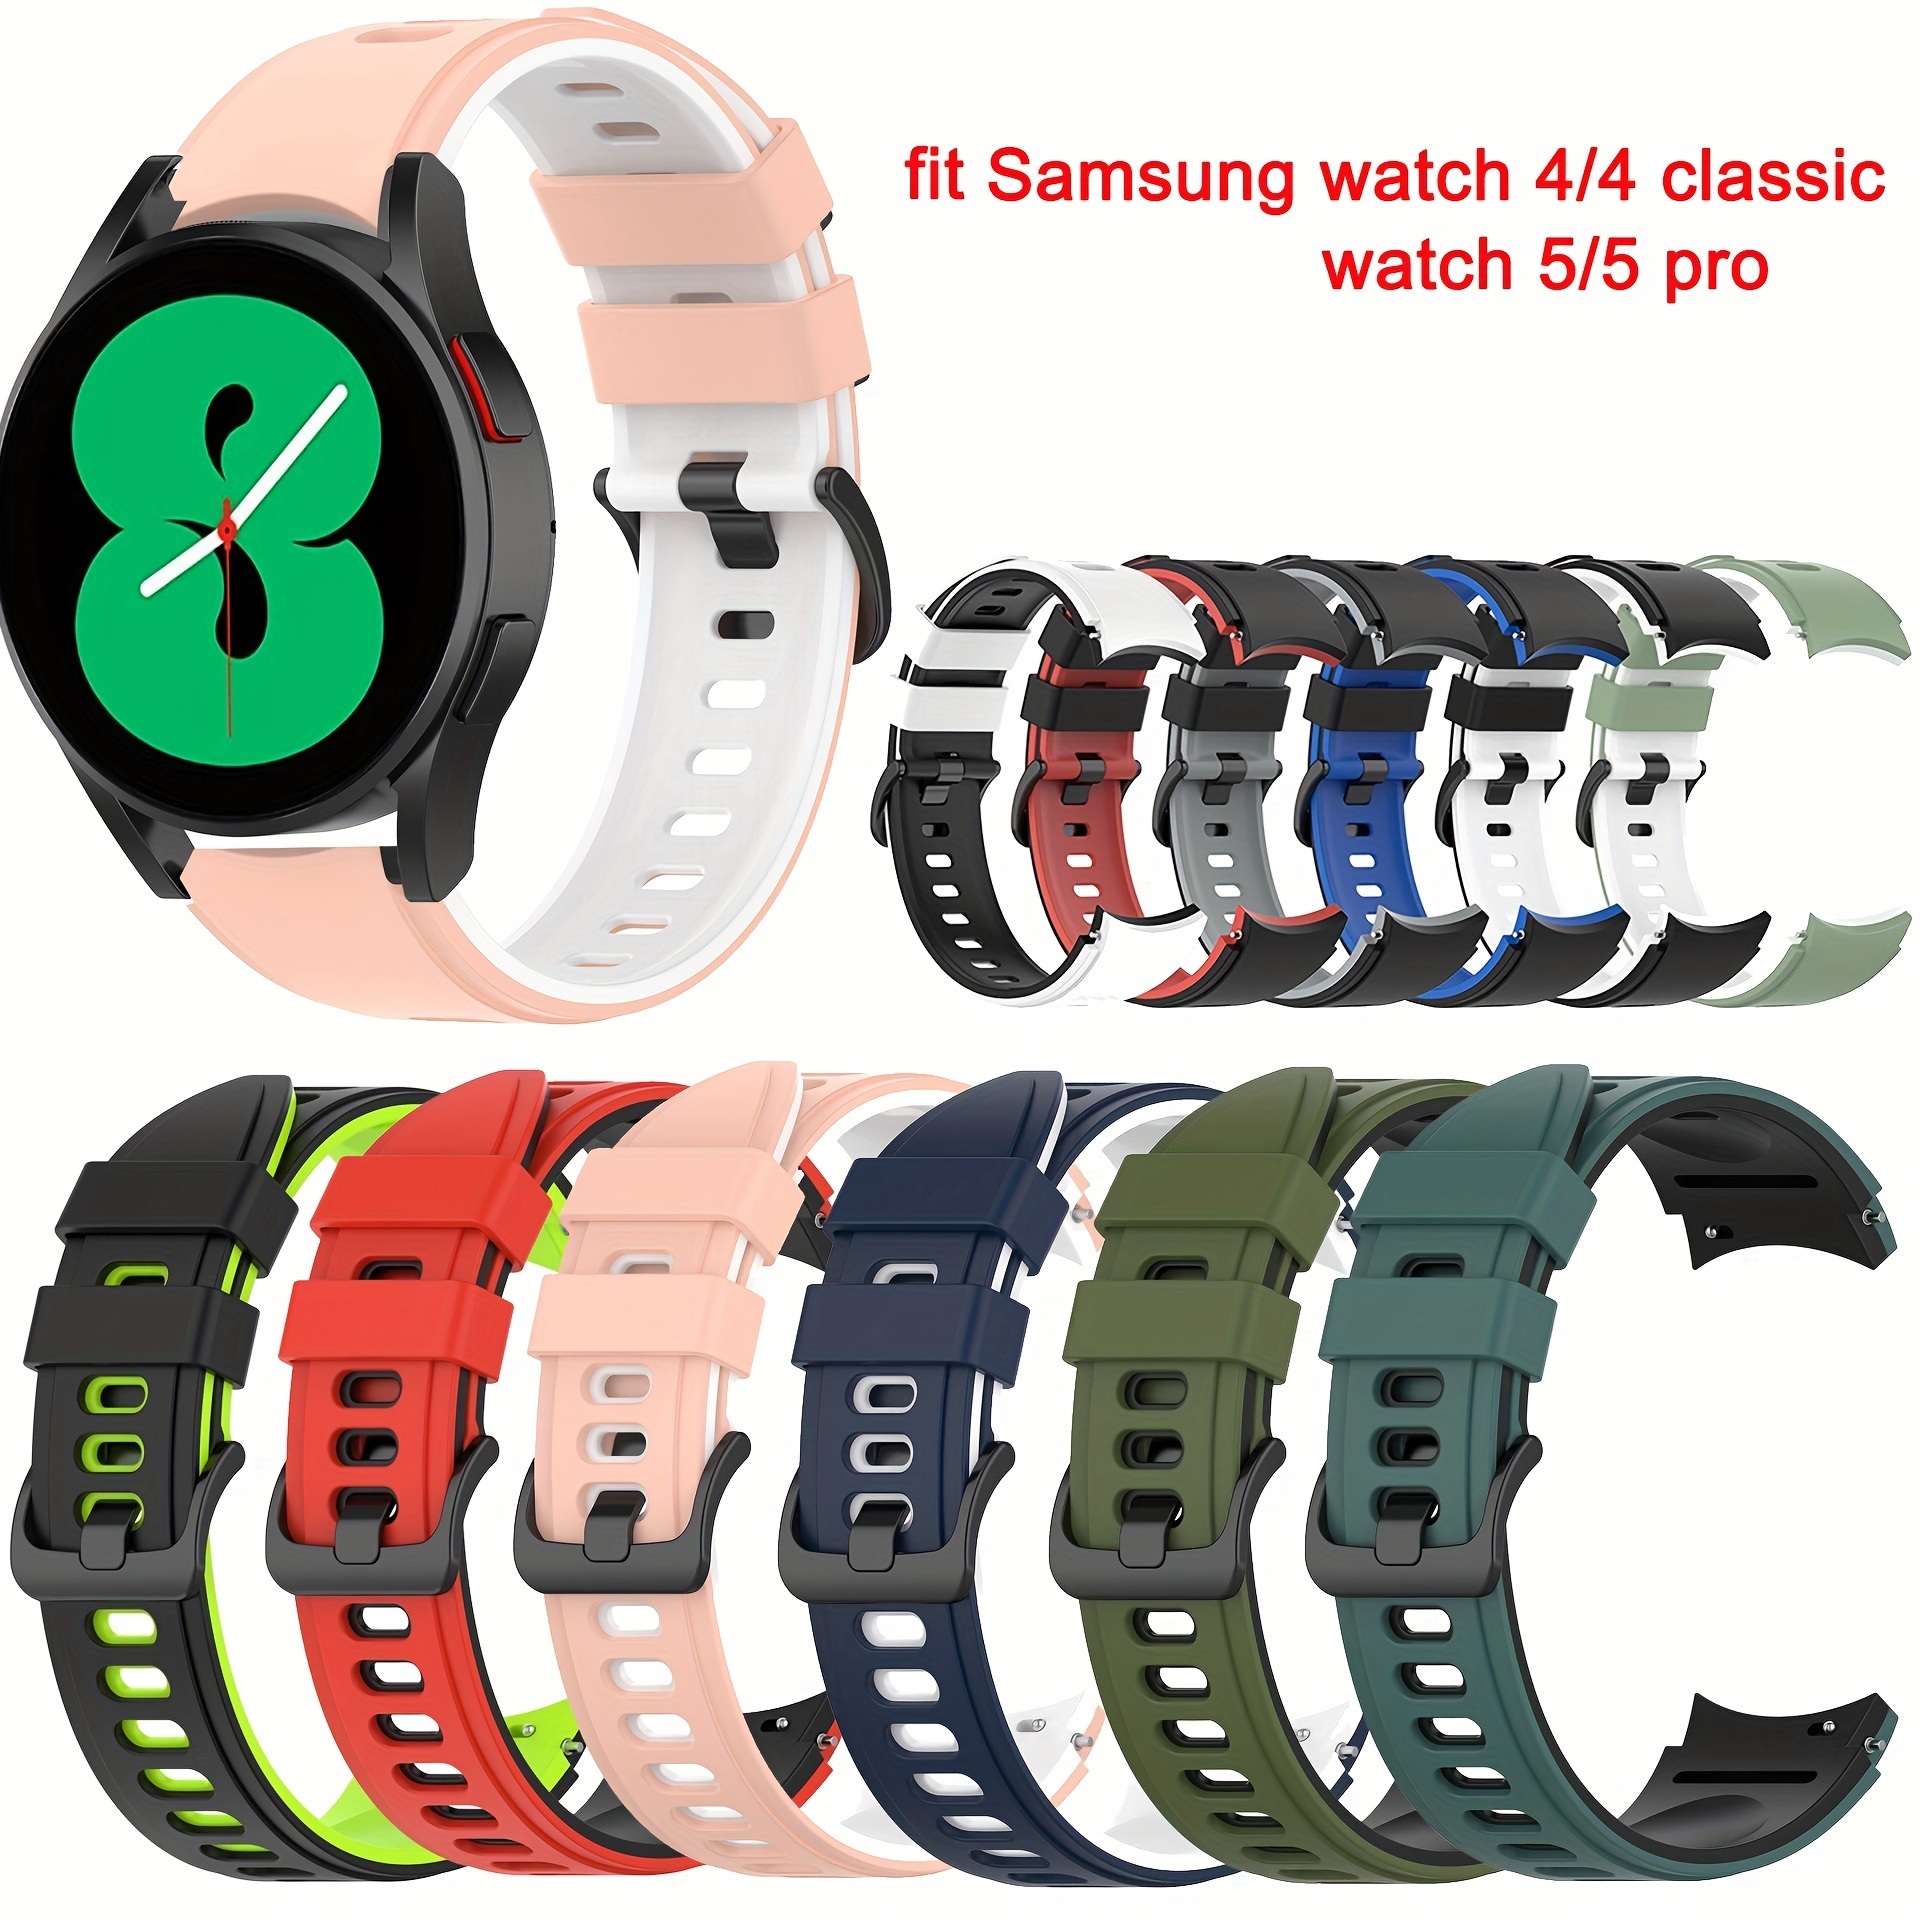 Samsung Galaxy Watch 5, Watch 5 Pro, Watch 4, Watch 3, Active 1,2, Gear S3 Gucci  Band Strap -LIMITED EDITION 5 -Handmade Leather Straps